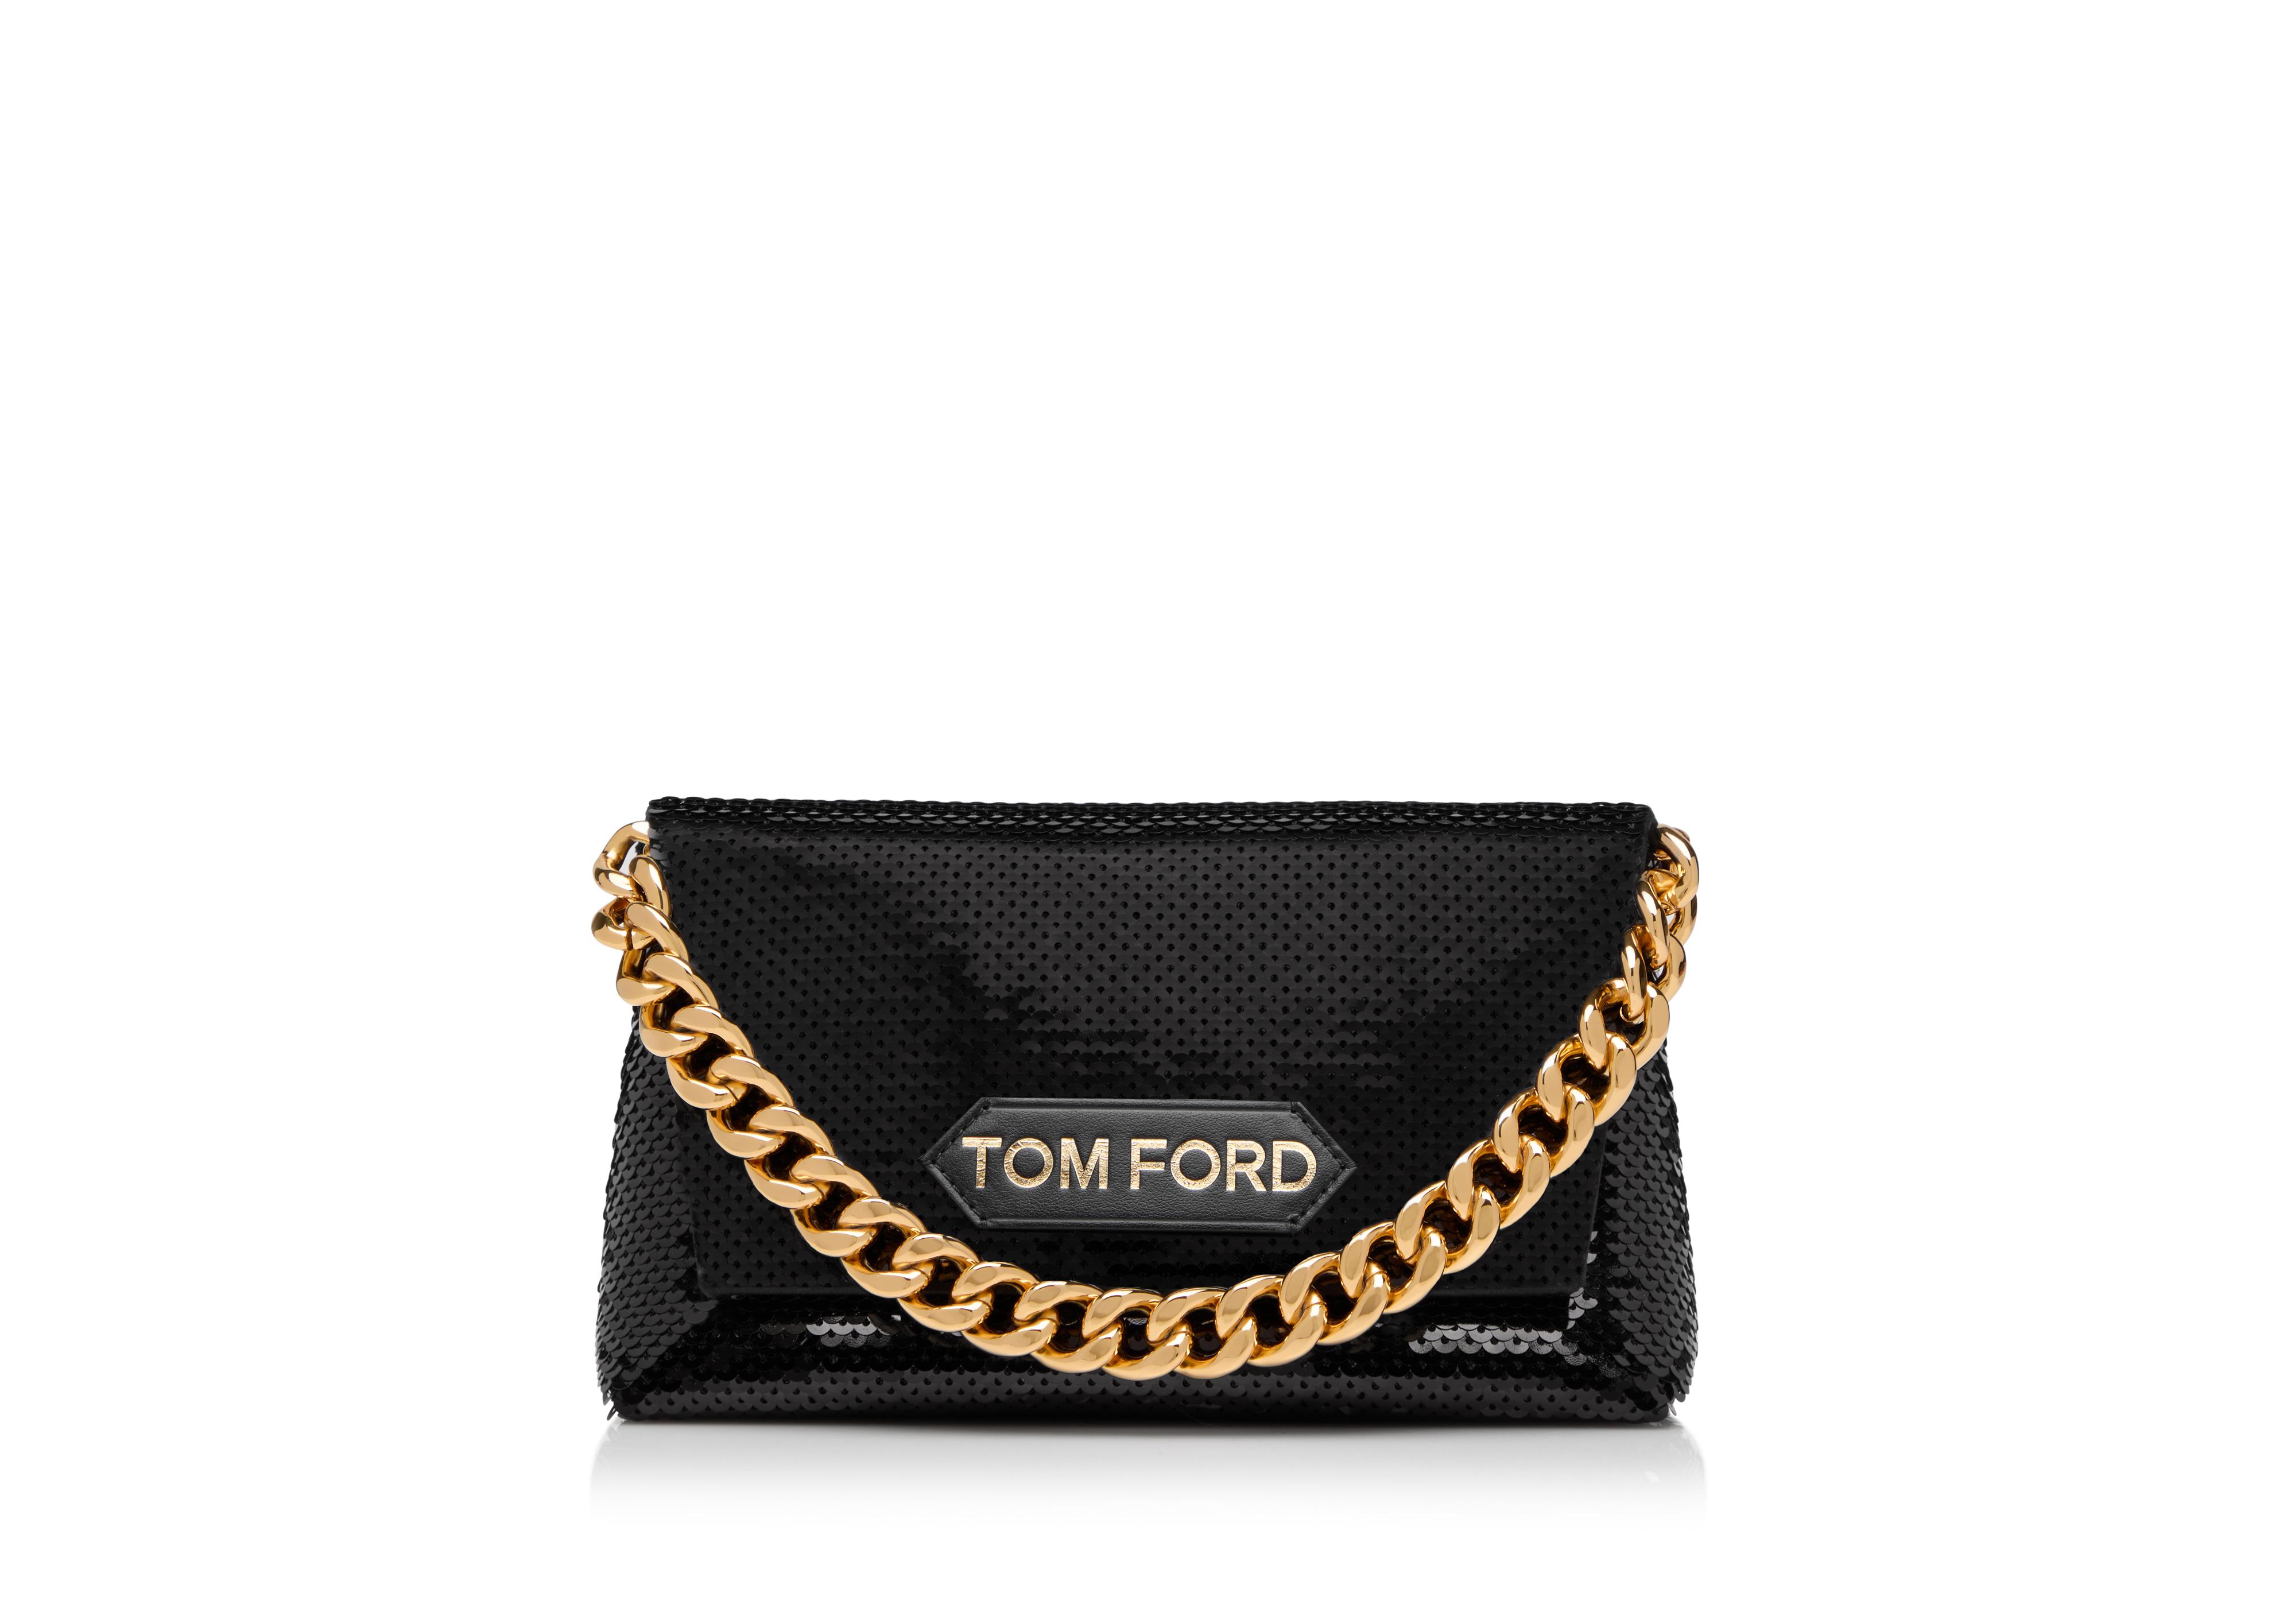 Tom Ford SEQUIN EMBROIDERY LABEL MINI CHAIN BAG 